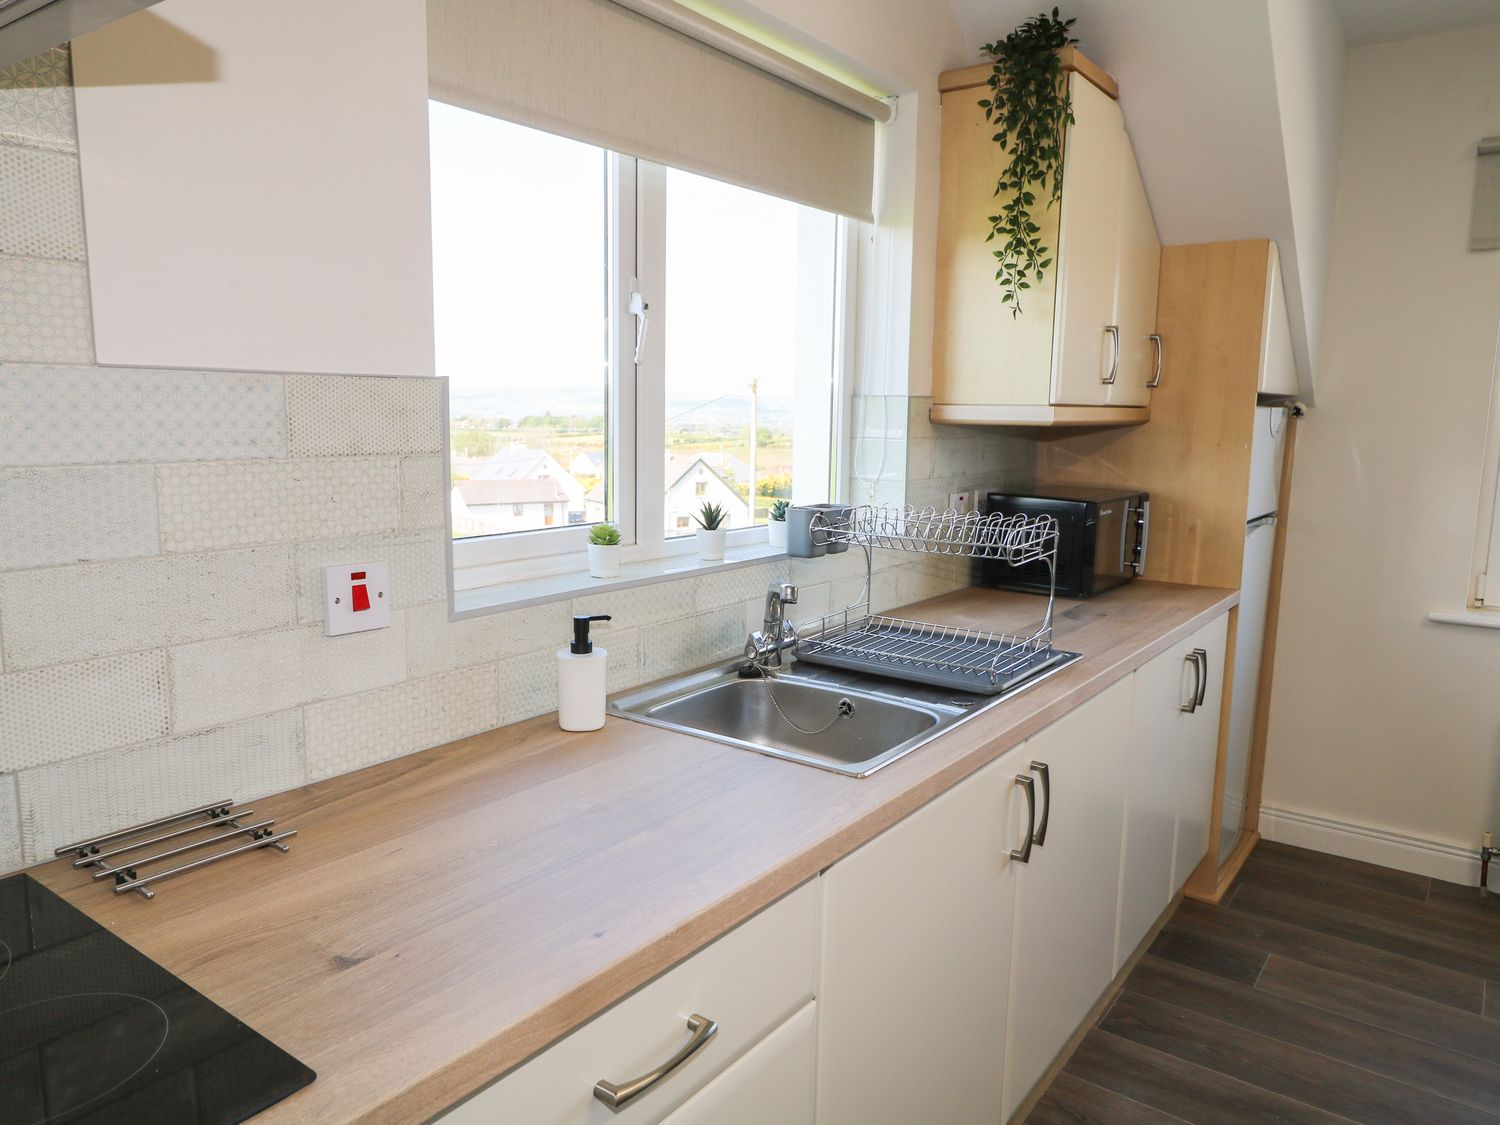 Inish Way Apartment 4, Carndonagh, County Donegal